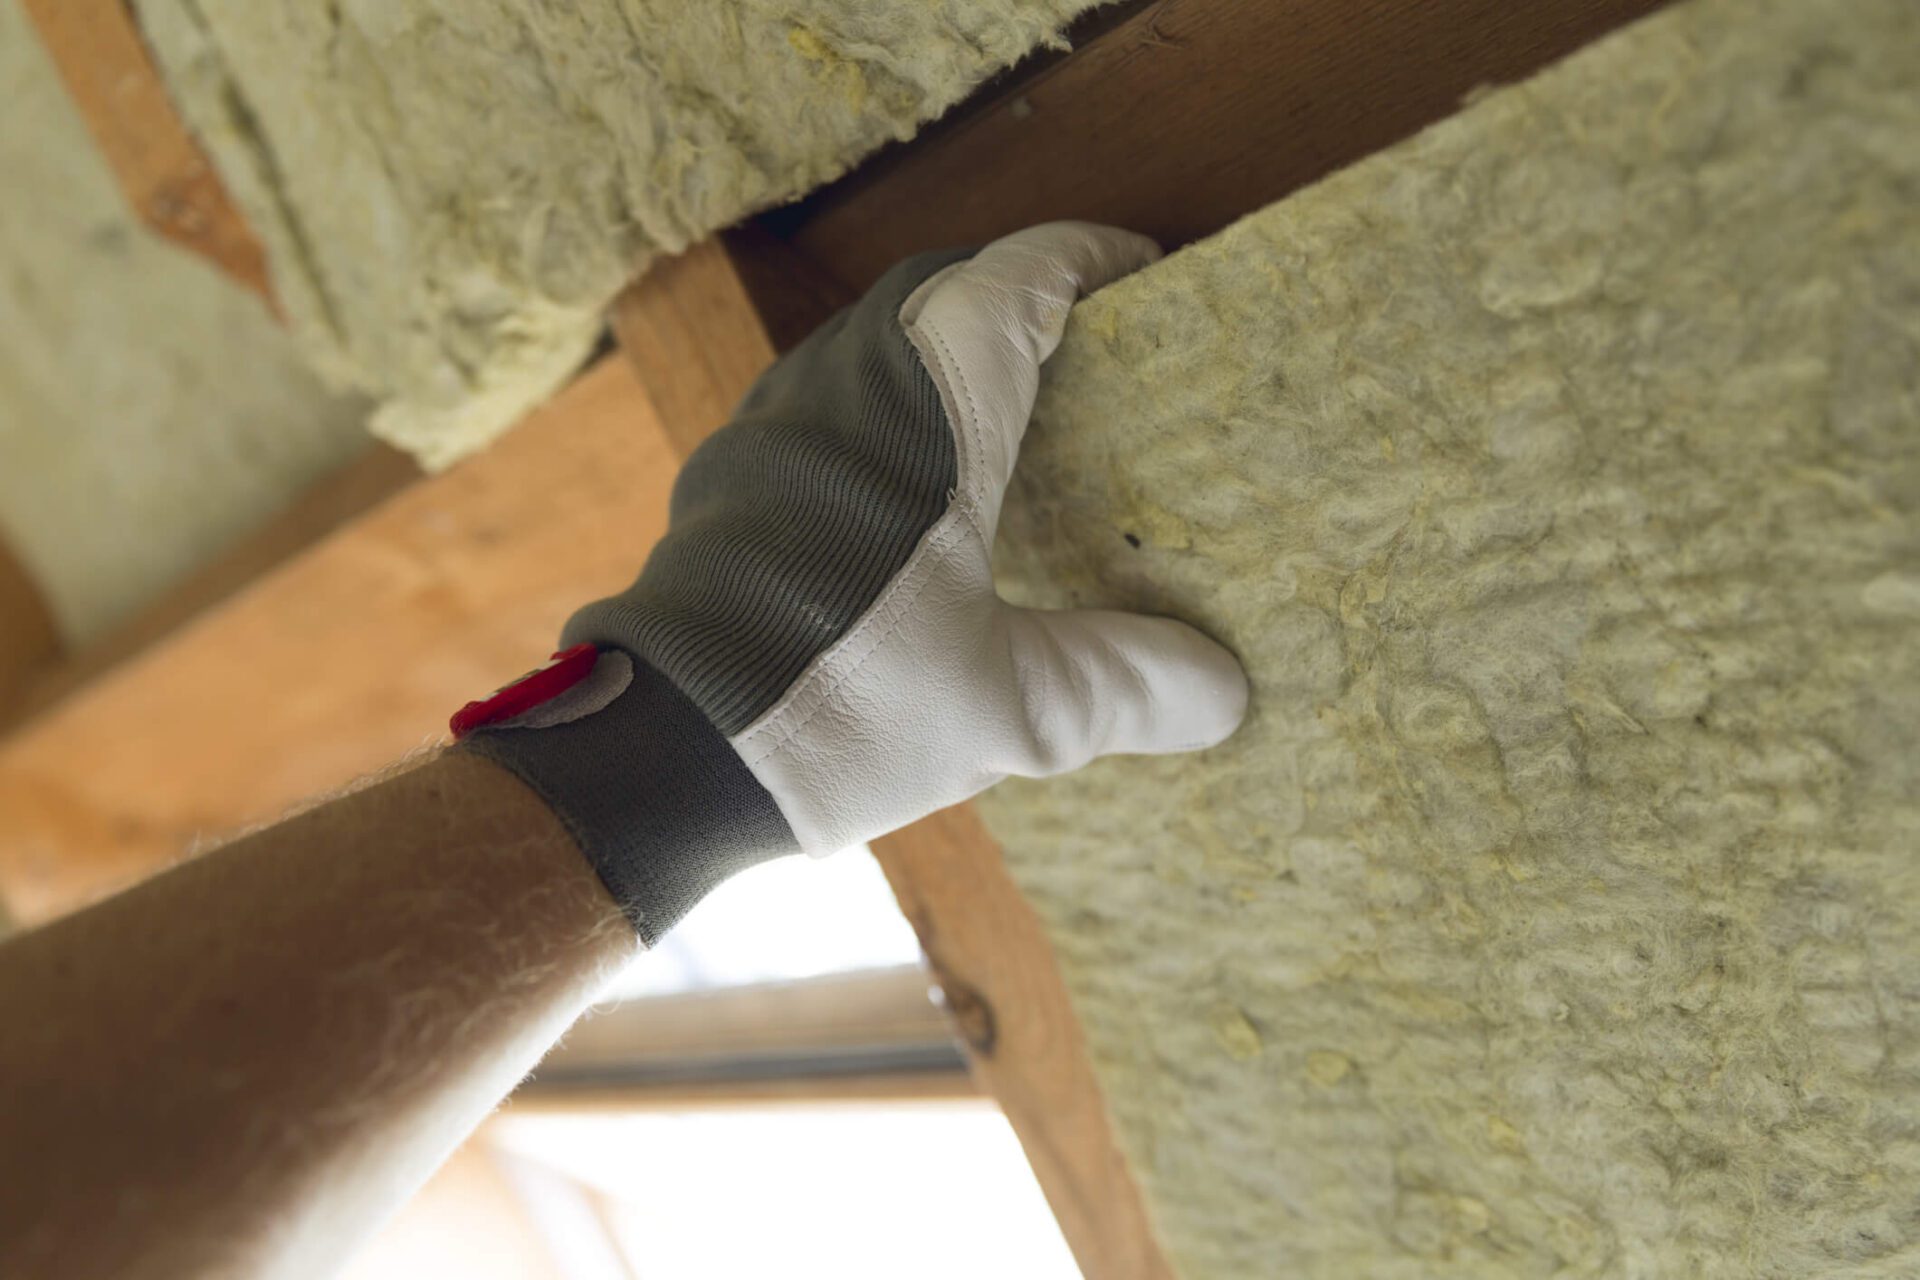 Insulation Render for All Seasons: Keeping Your Home Comfortable